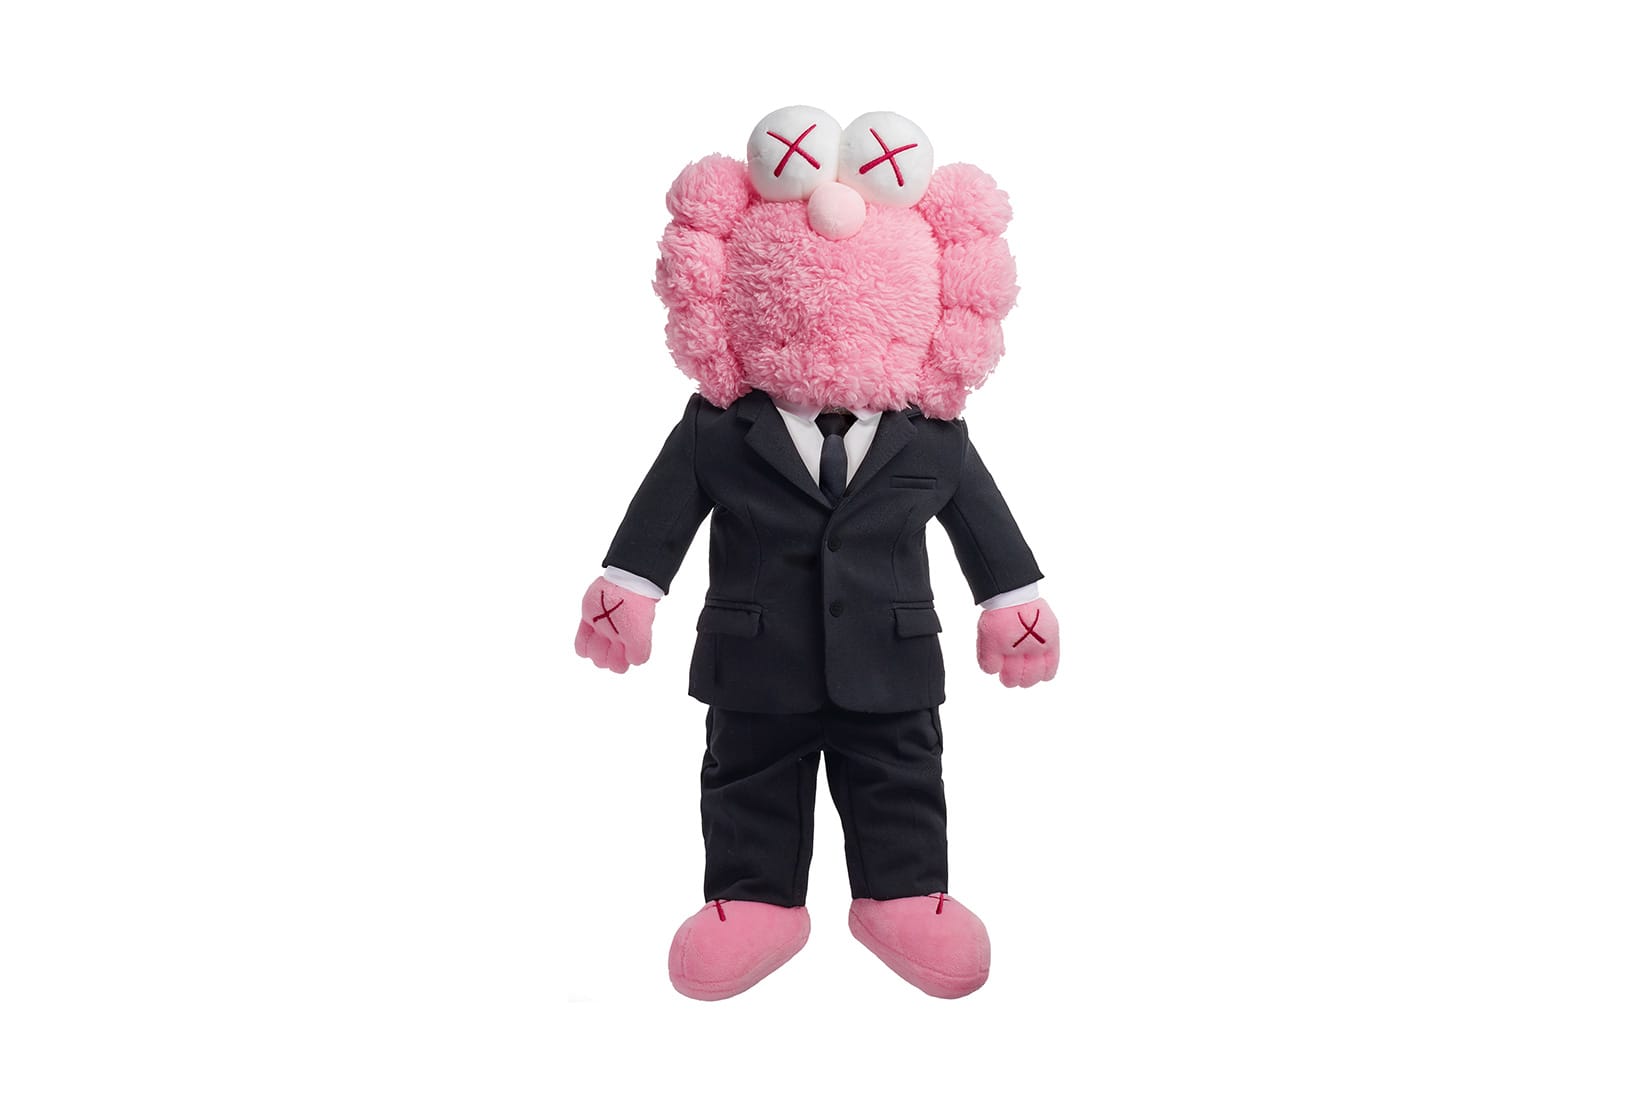 Dior x KAWS Pink BFF Doll Now Available 